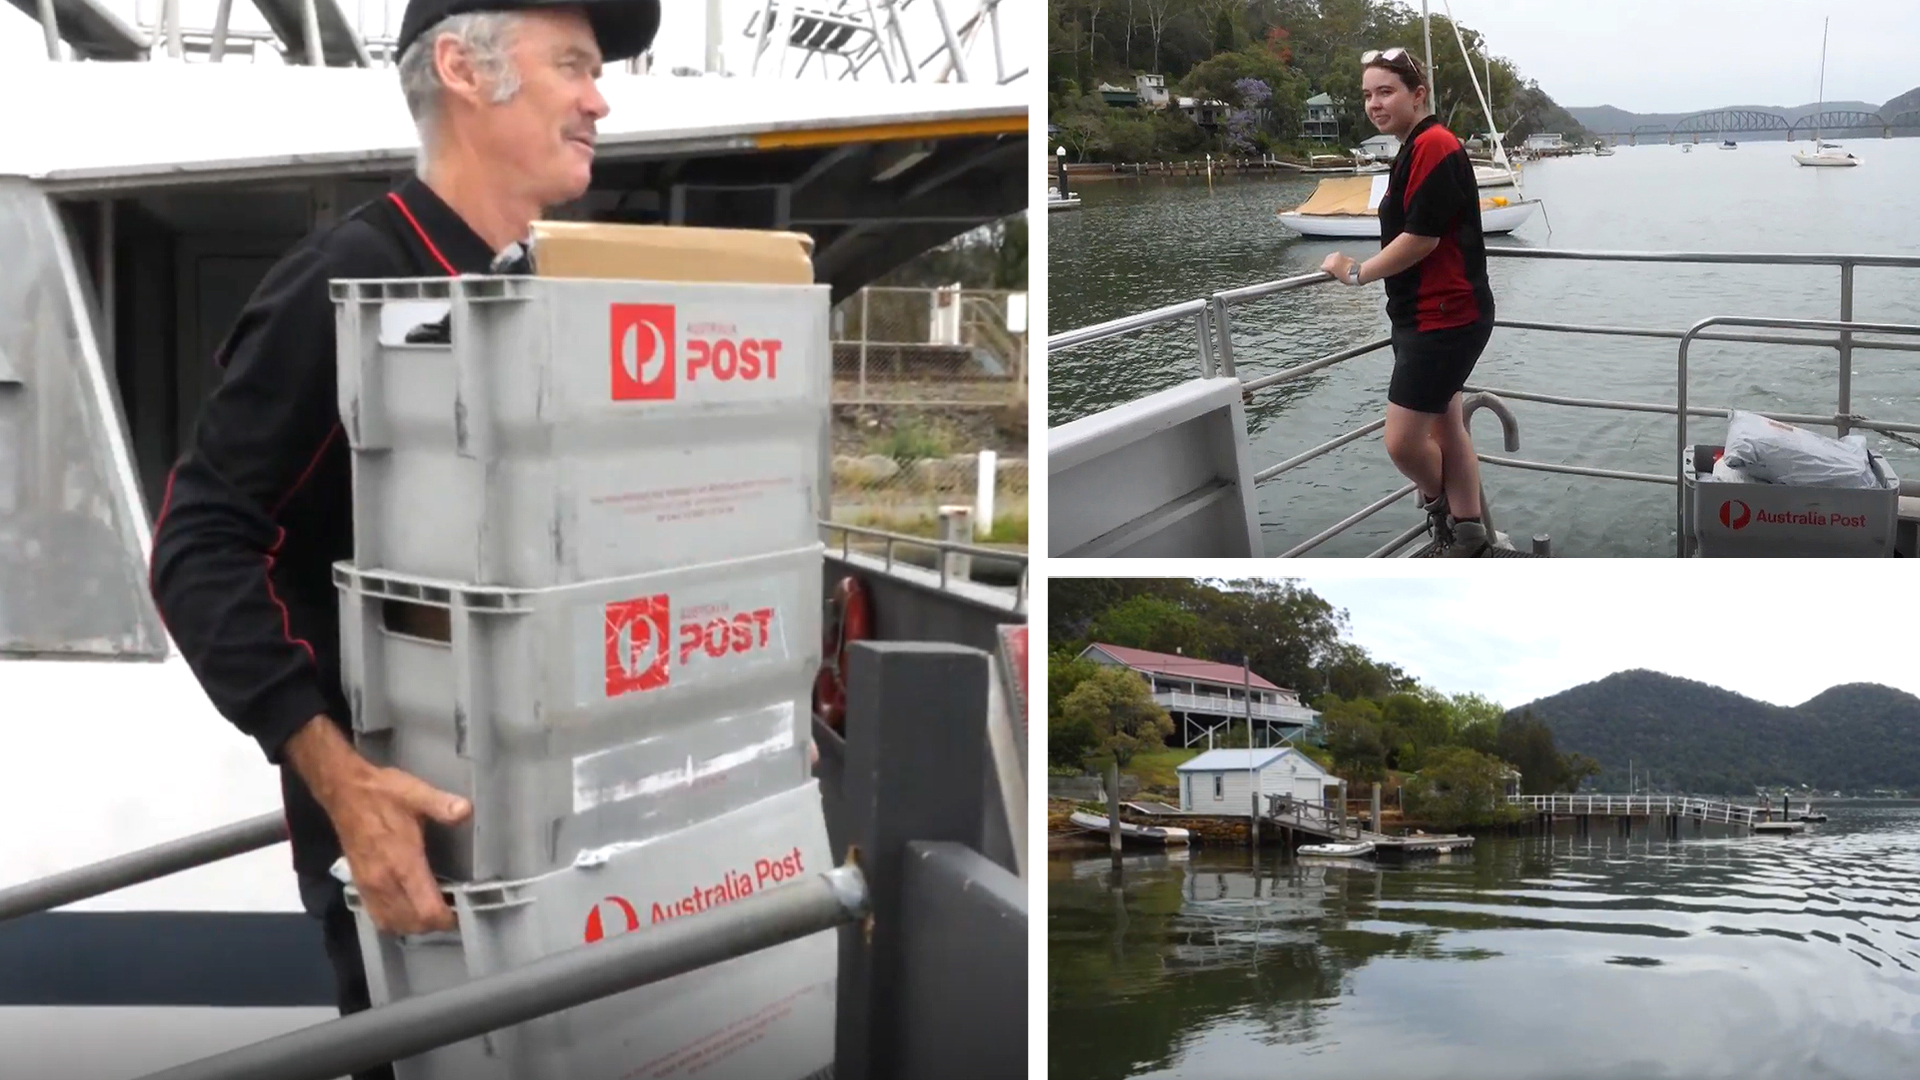 A composite image of a man carrying "Australia Post" plastic tubs, a young woman on a boat railing, and houses on a river.